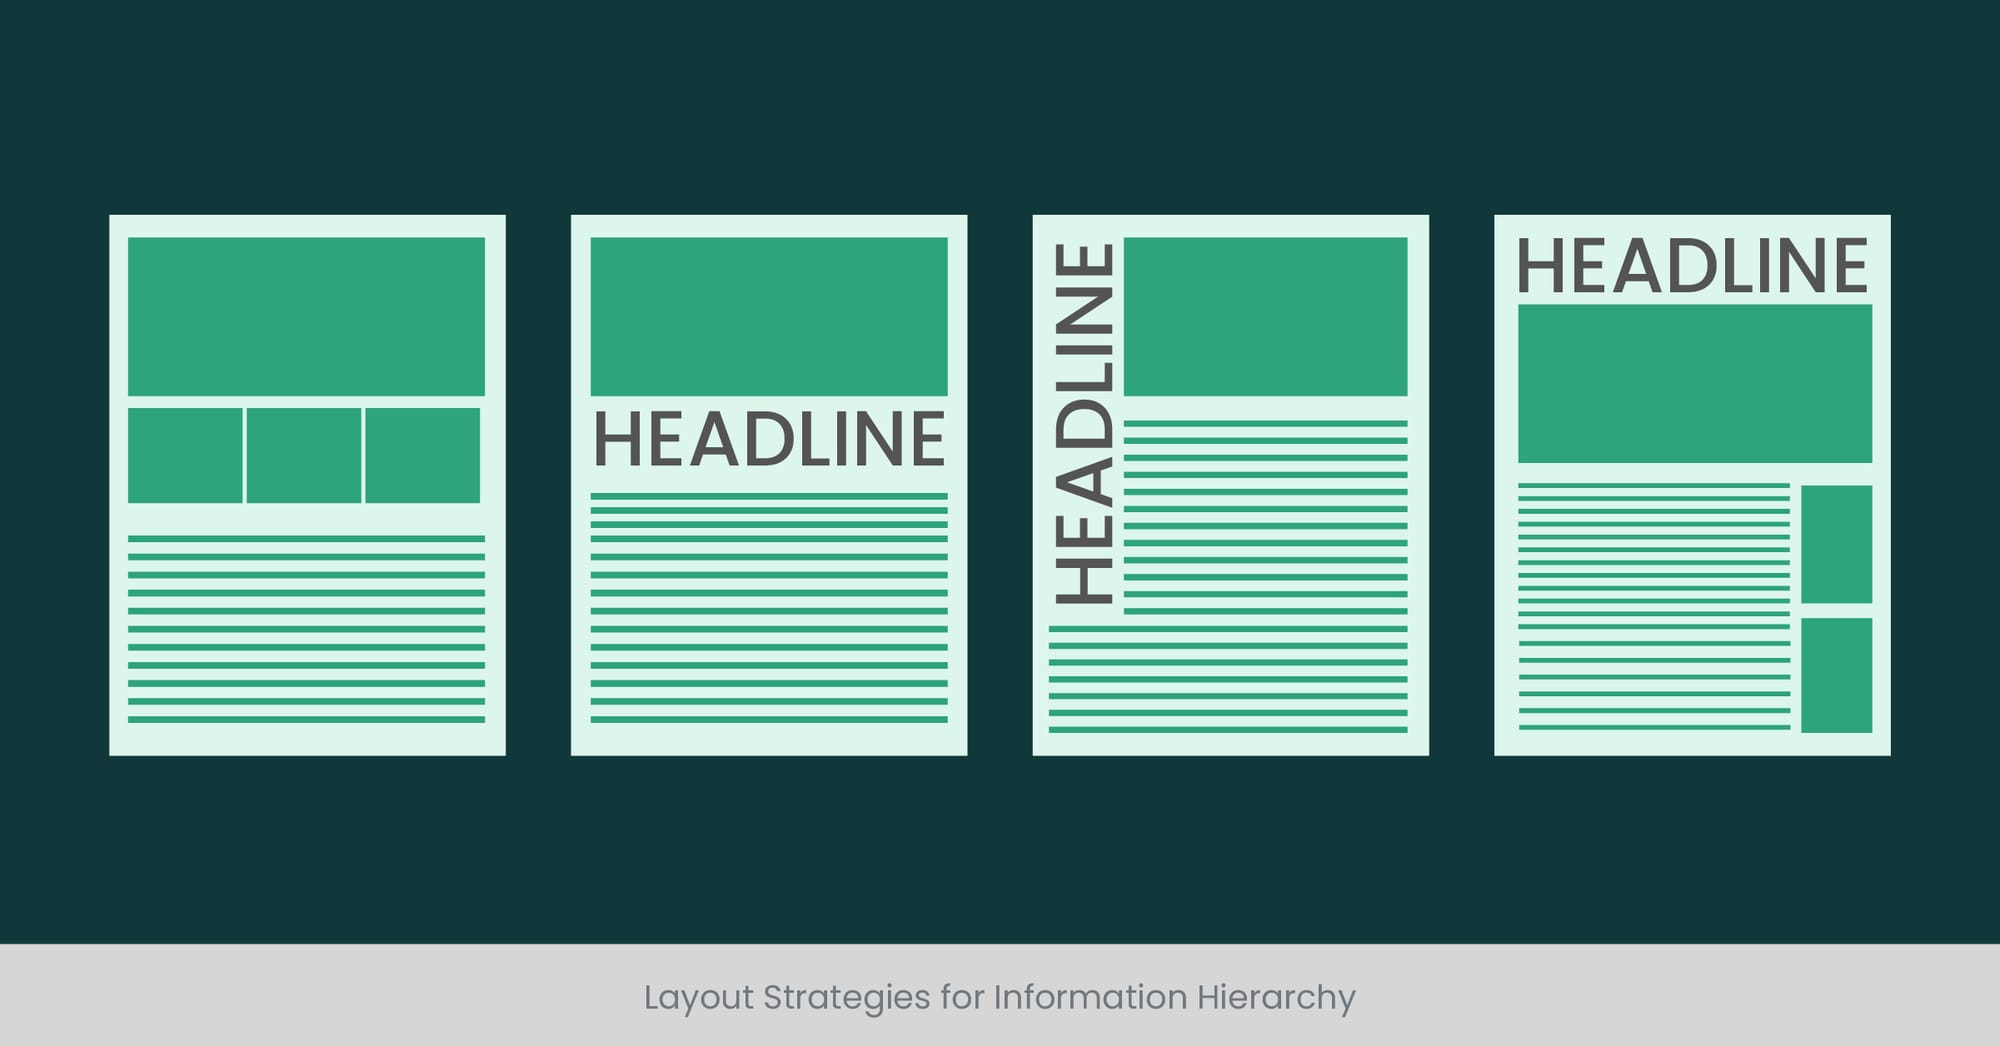 Layout Strategies for Information Hierarchy